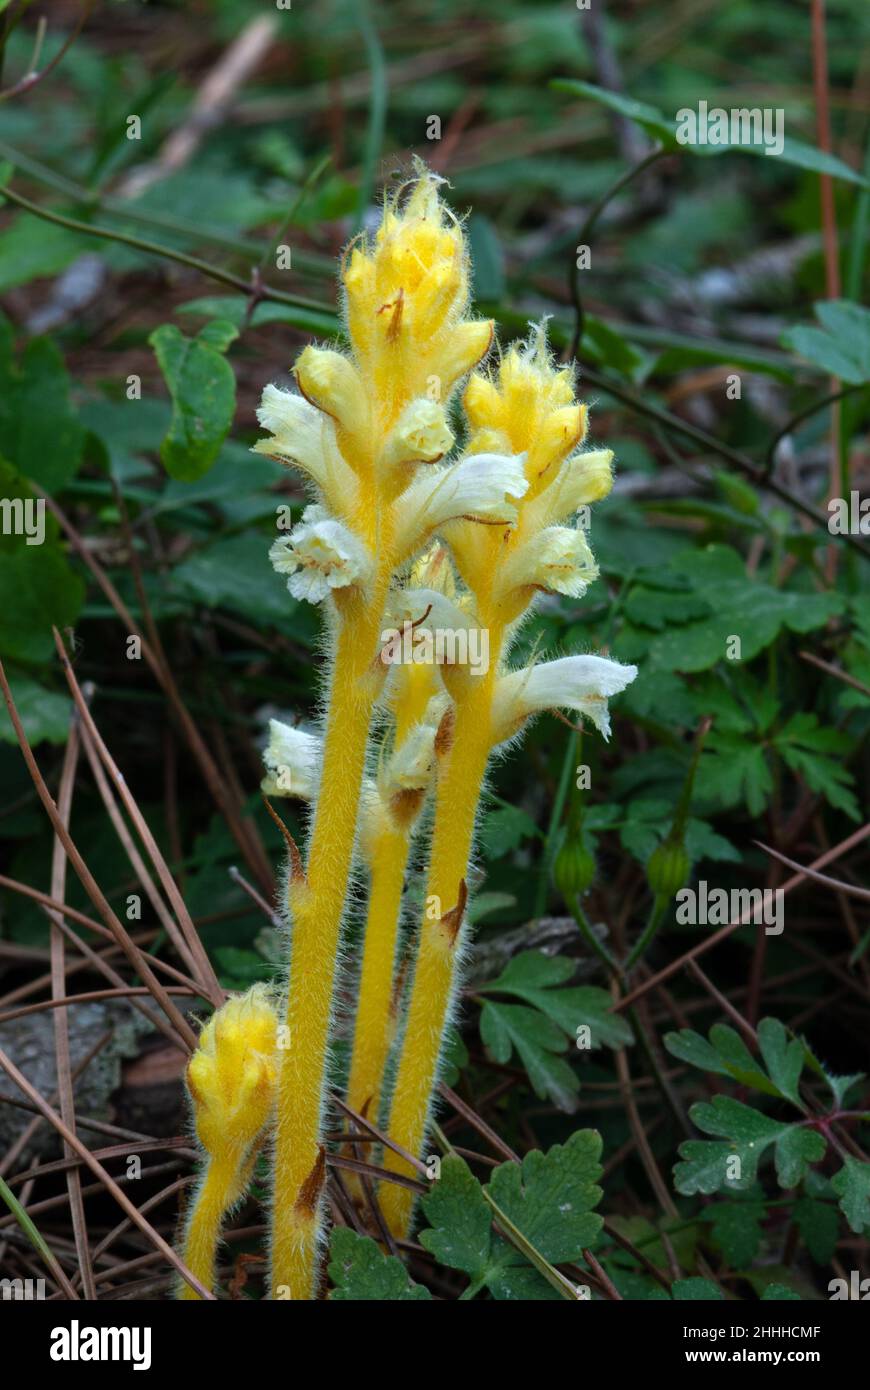 Orobanche pubescens (hairy broomrape) is found from Central and Eastern Mediterranean to the Caucasus growing in phrygana and grasslands, Stock Photo